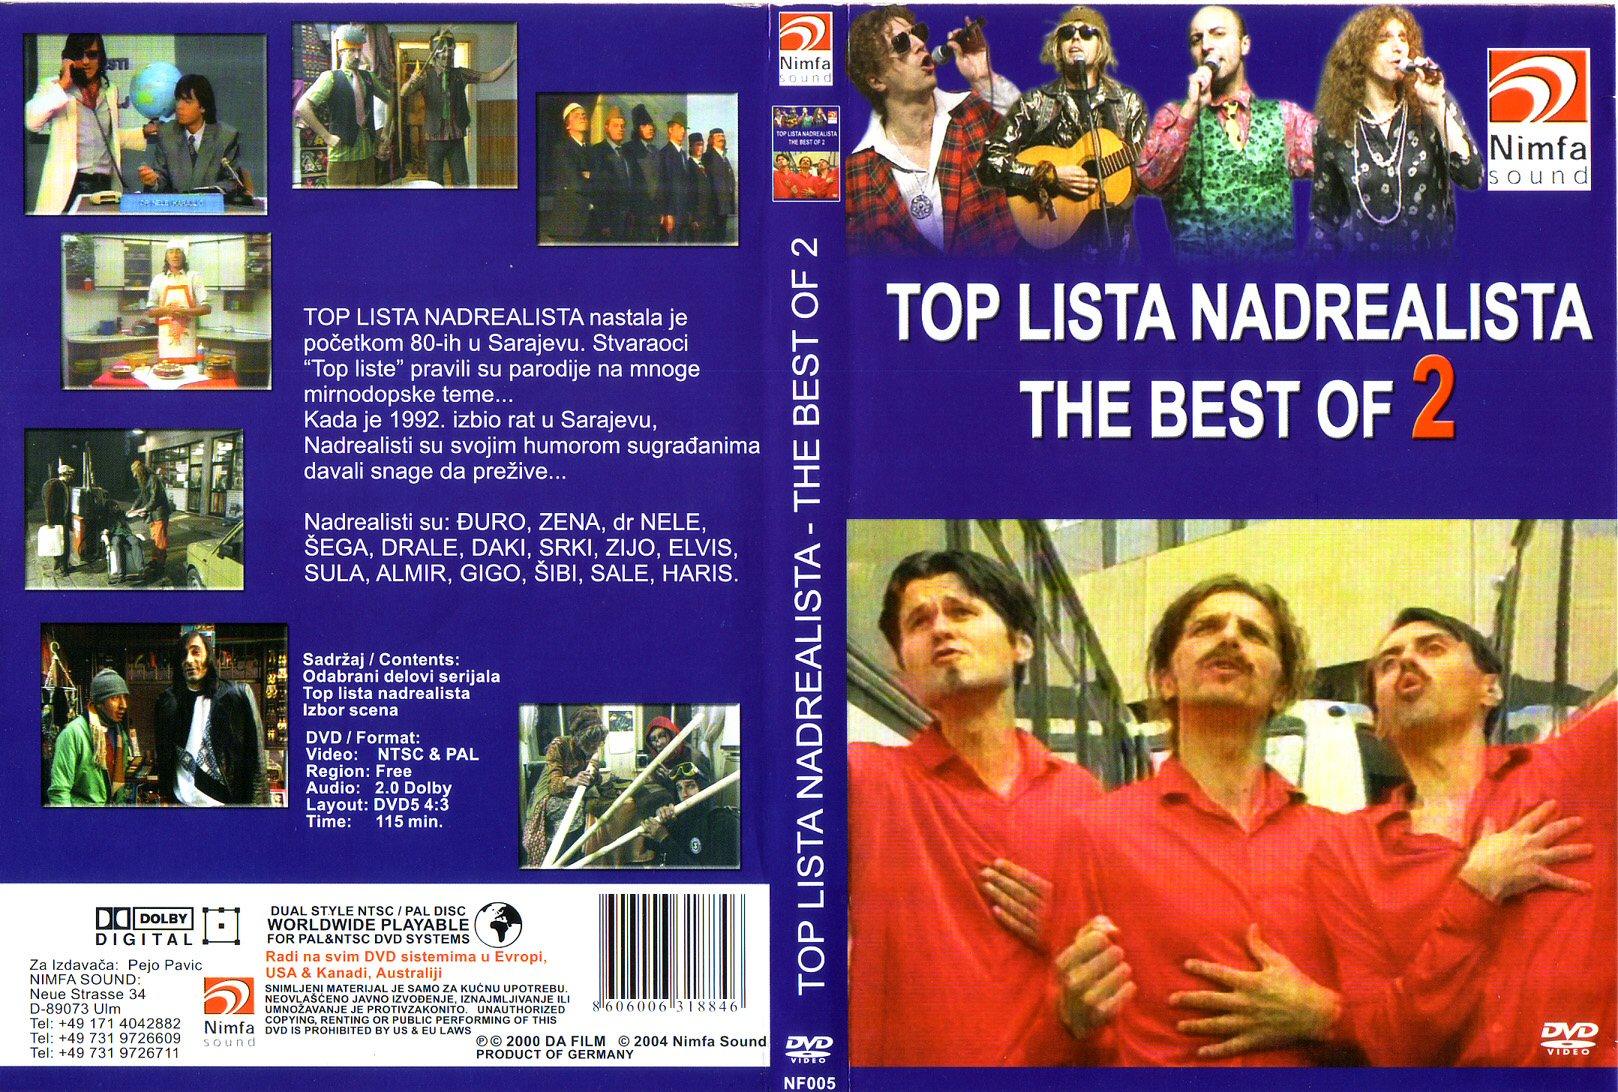 Click to view full size image -  DVD Cover - T - top_lista_nadrealista_the_best_of_2_dvd - top_lista_nadrealista_the_best_of_2_dvd.jpg